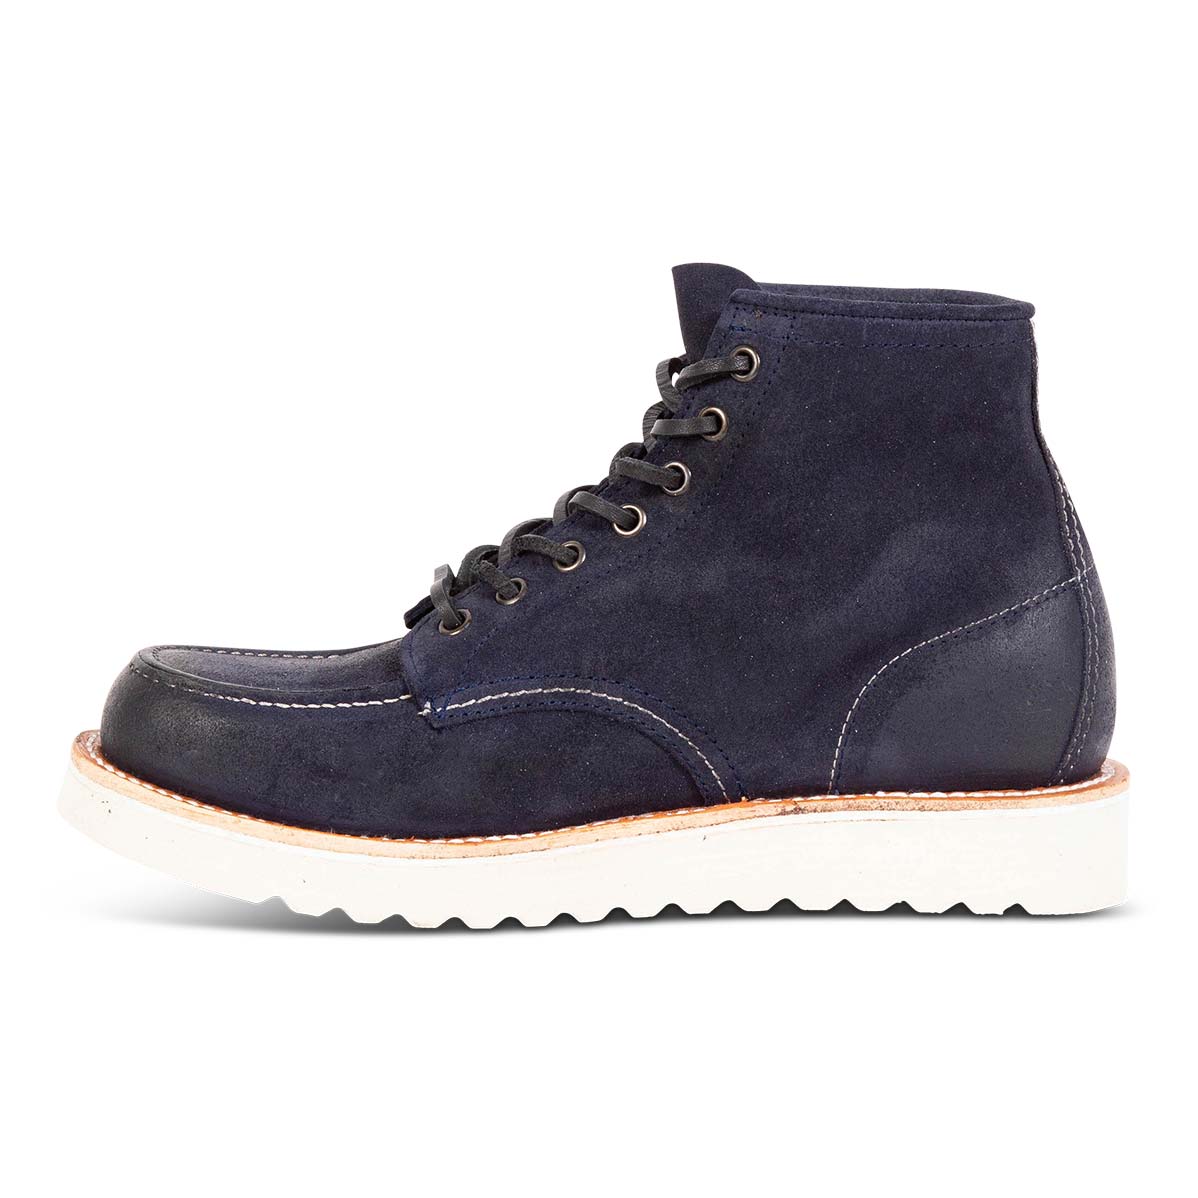 Inside view showing suede body and soft sole on FREEBIRD men's Carbon navy suede shoe